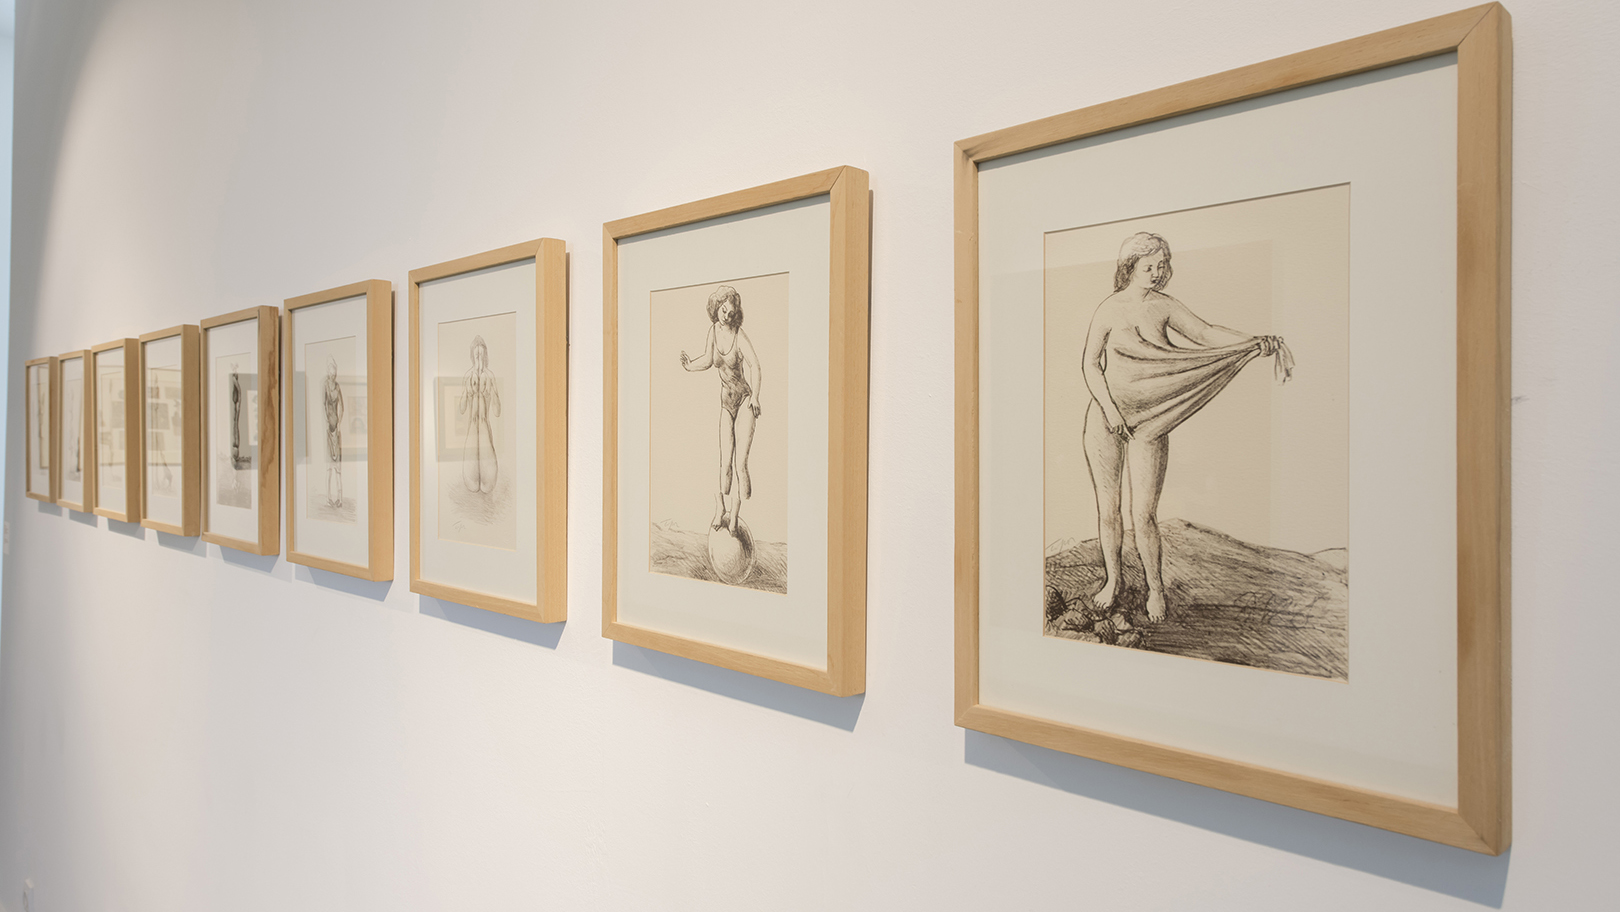 Roland Topor, Nine Beauties or The Judgment of Paris, 1993, lithography, each signed and numbered, 25x18 cm. Photo by Kayhan Kaygusuz.